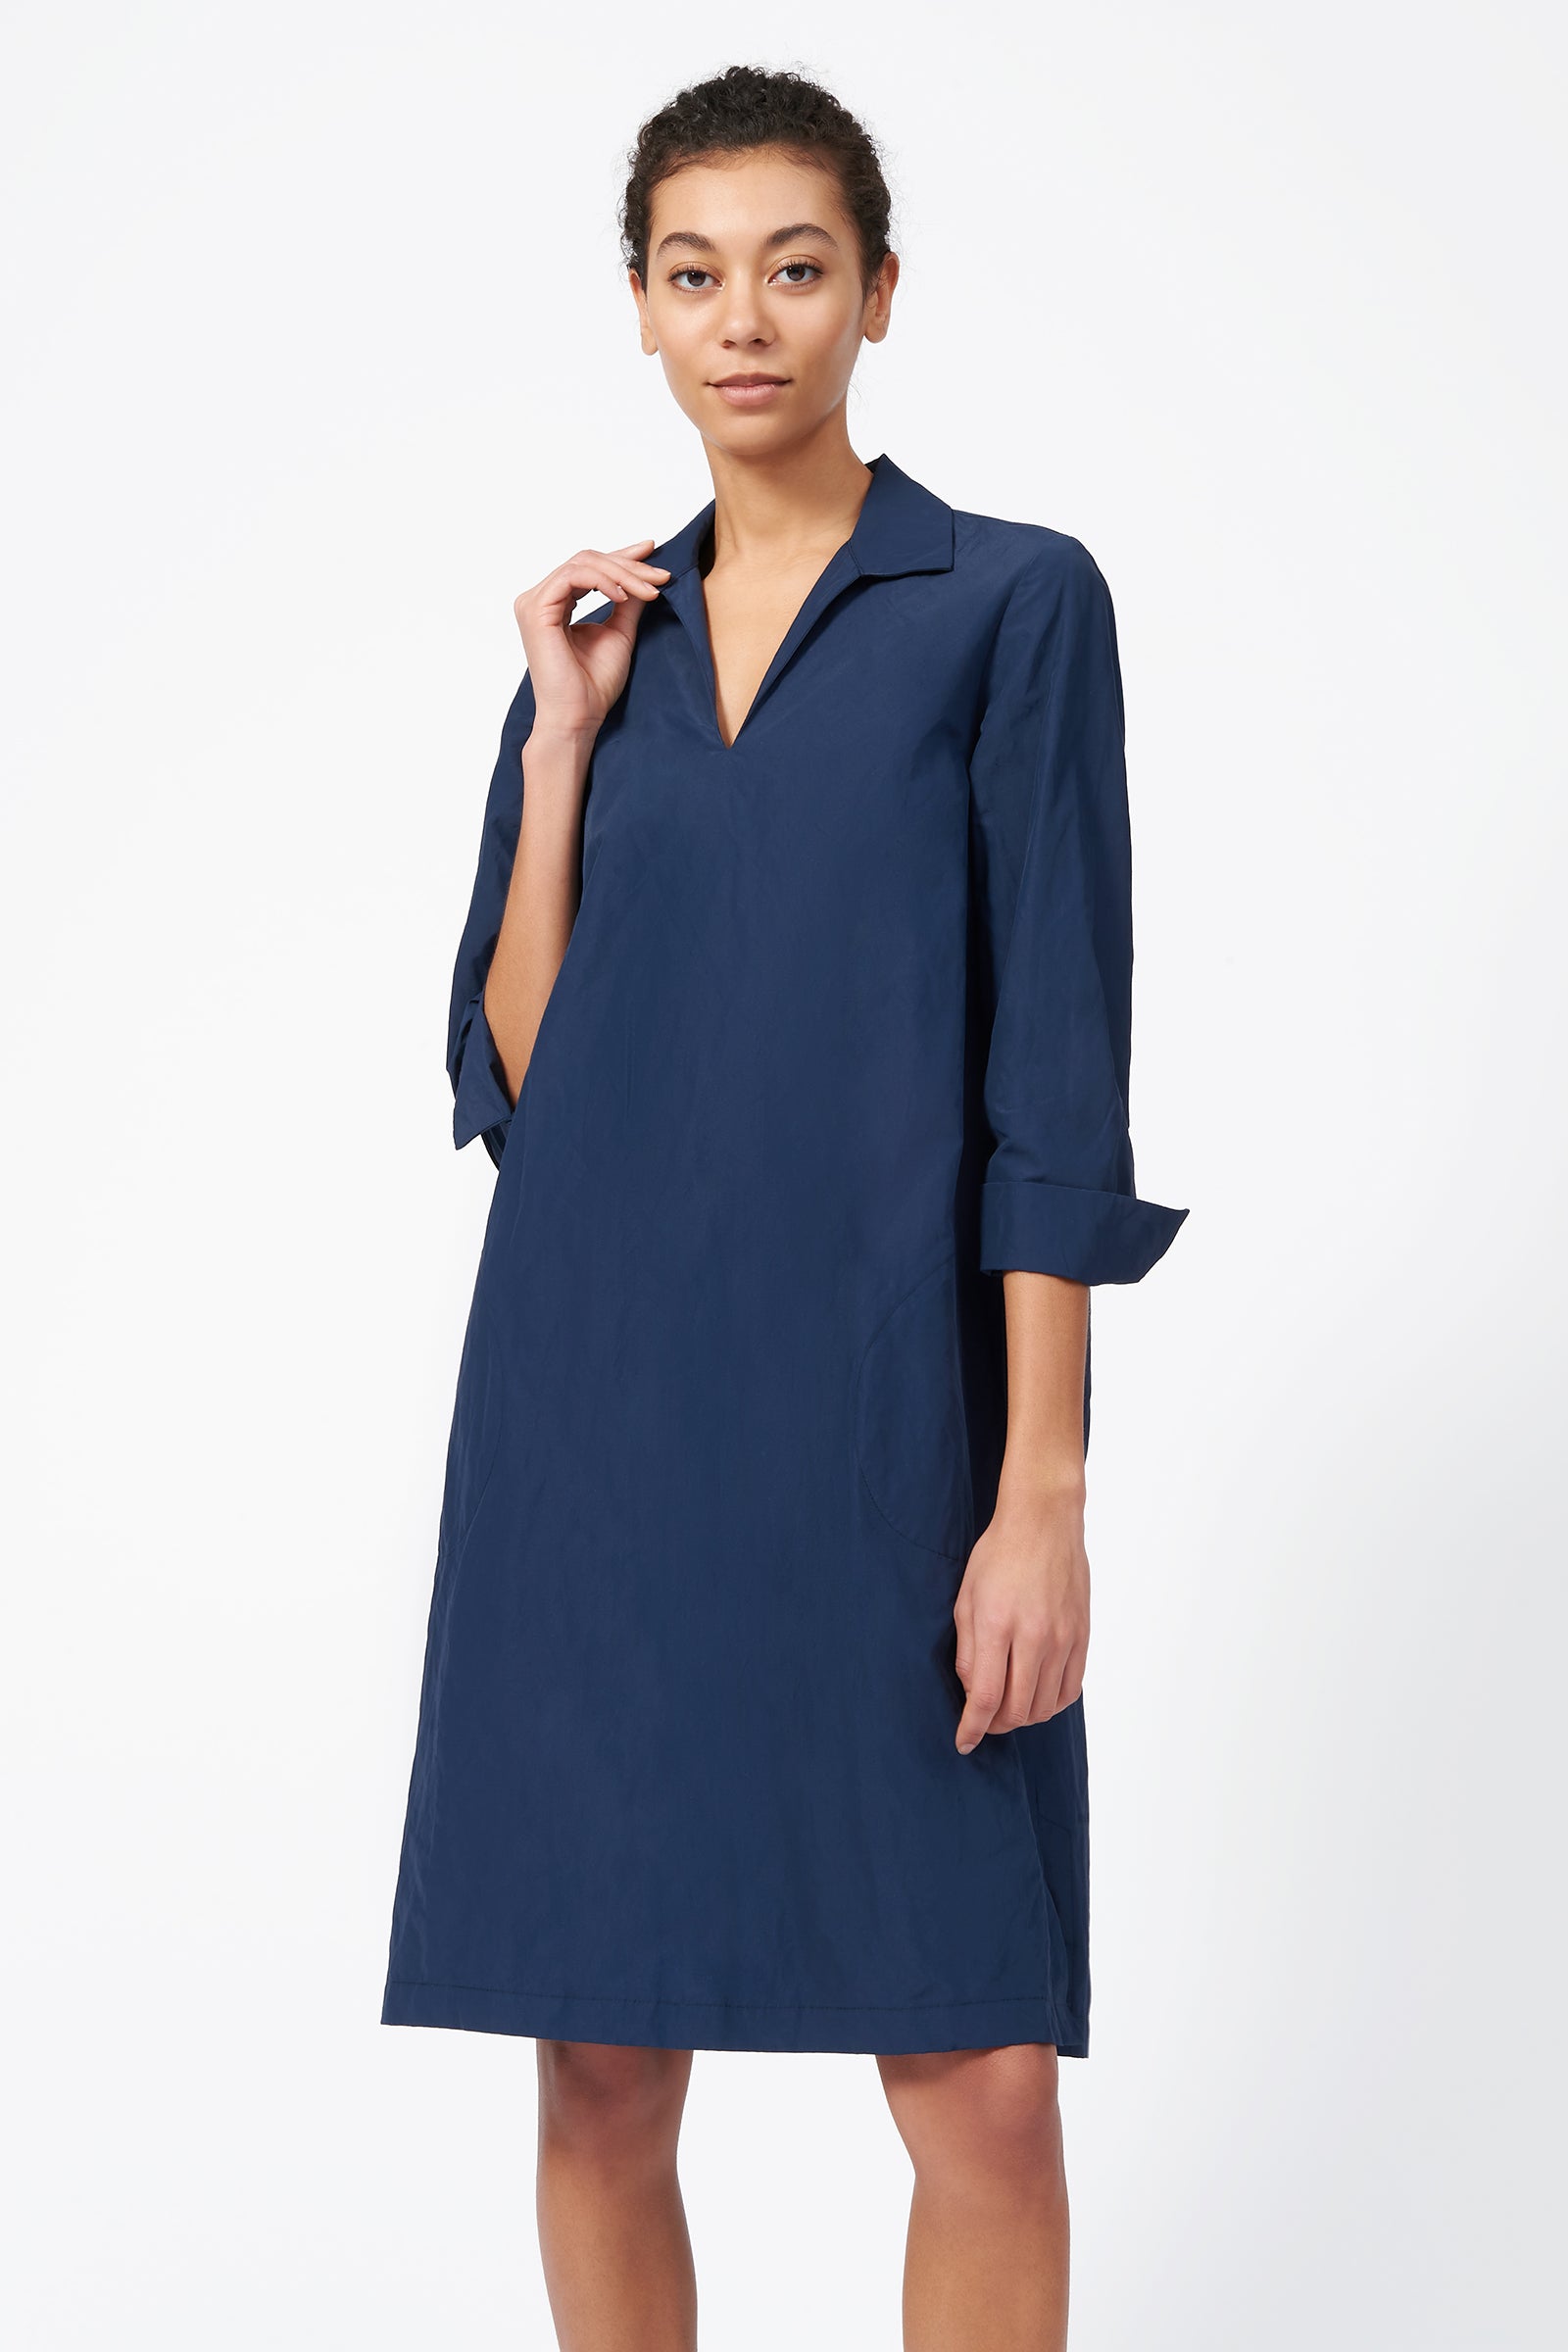 Kal Rieman Cecil Collared V-Neck Dress in Summer Navy on model touching collar front view